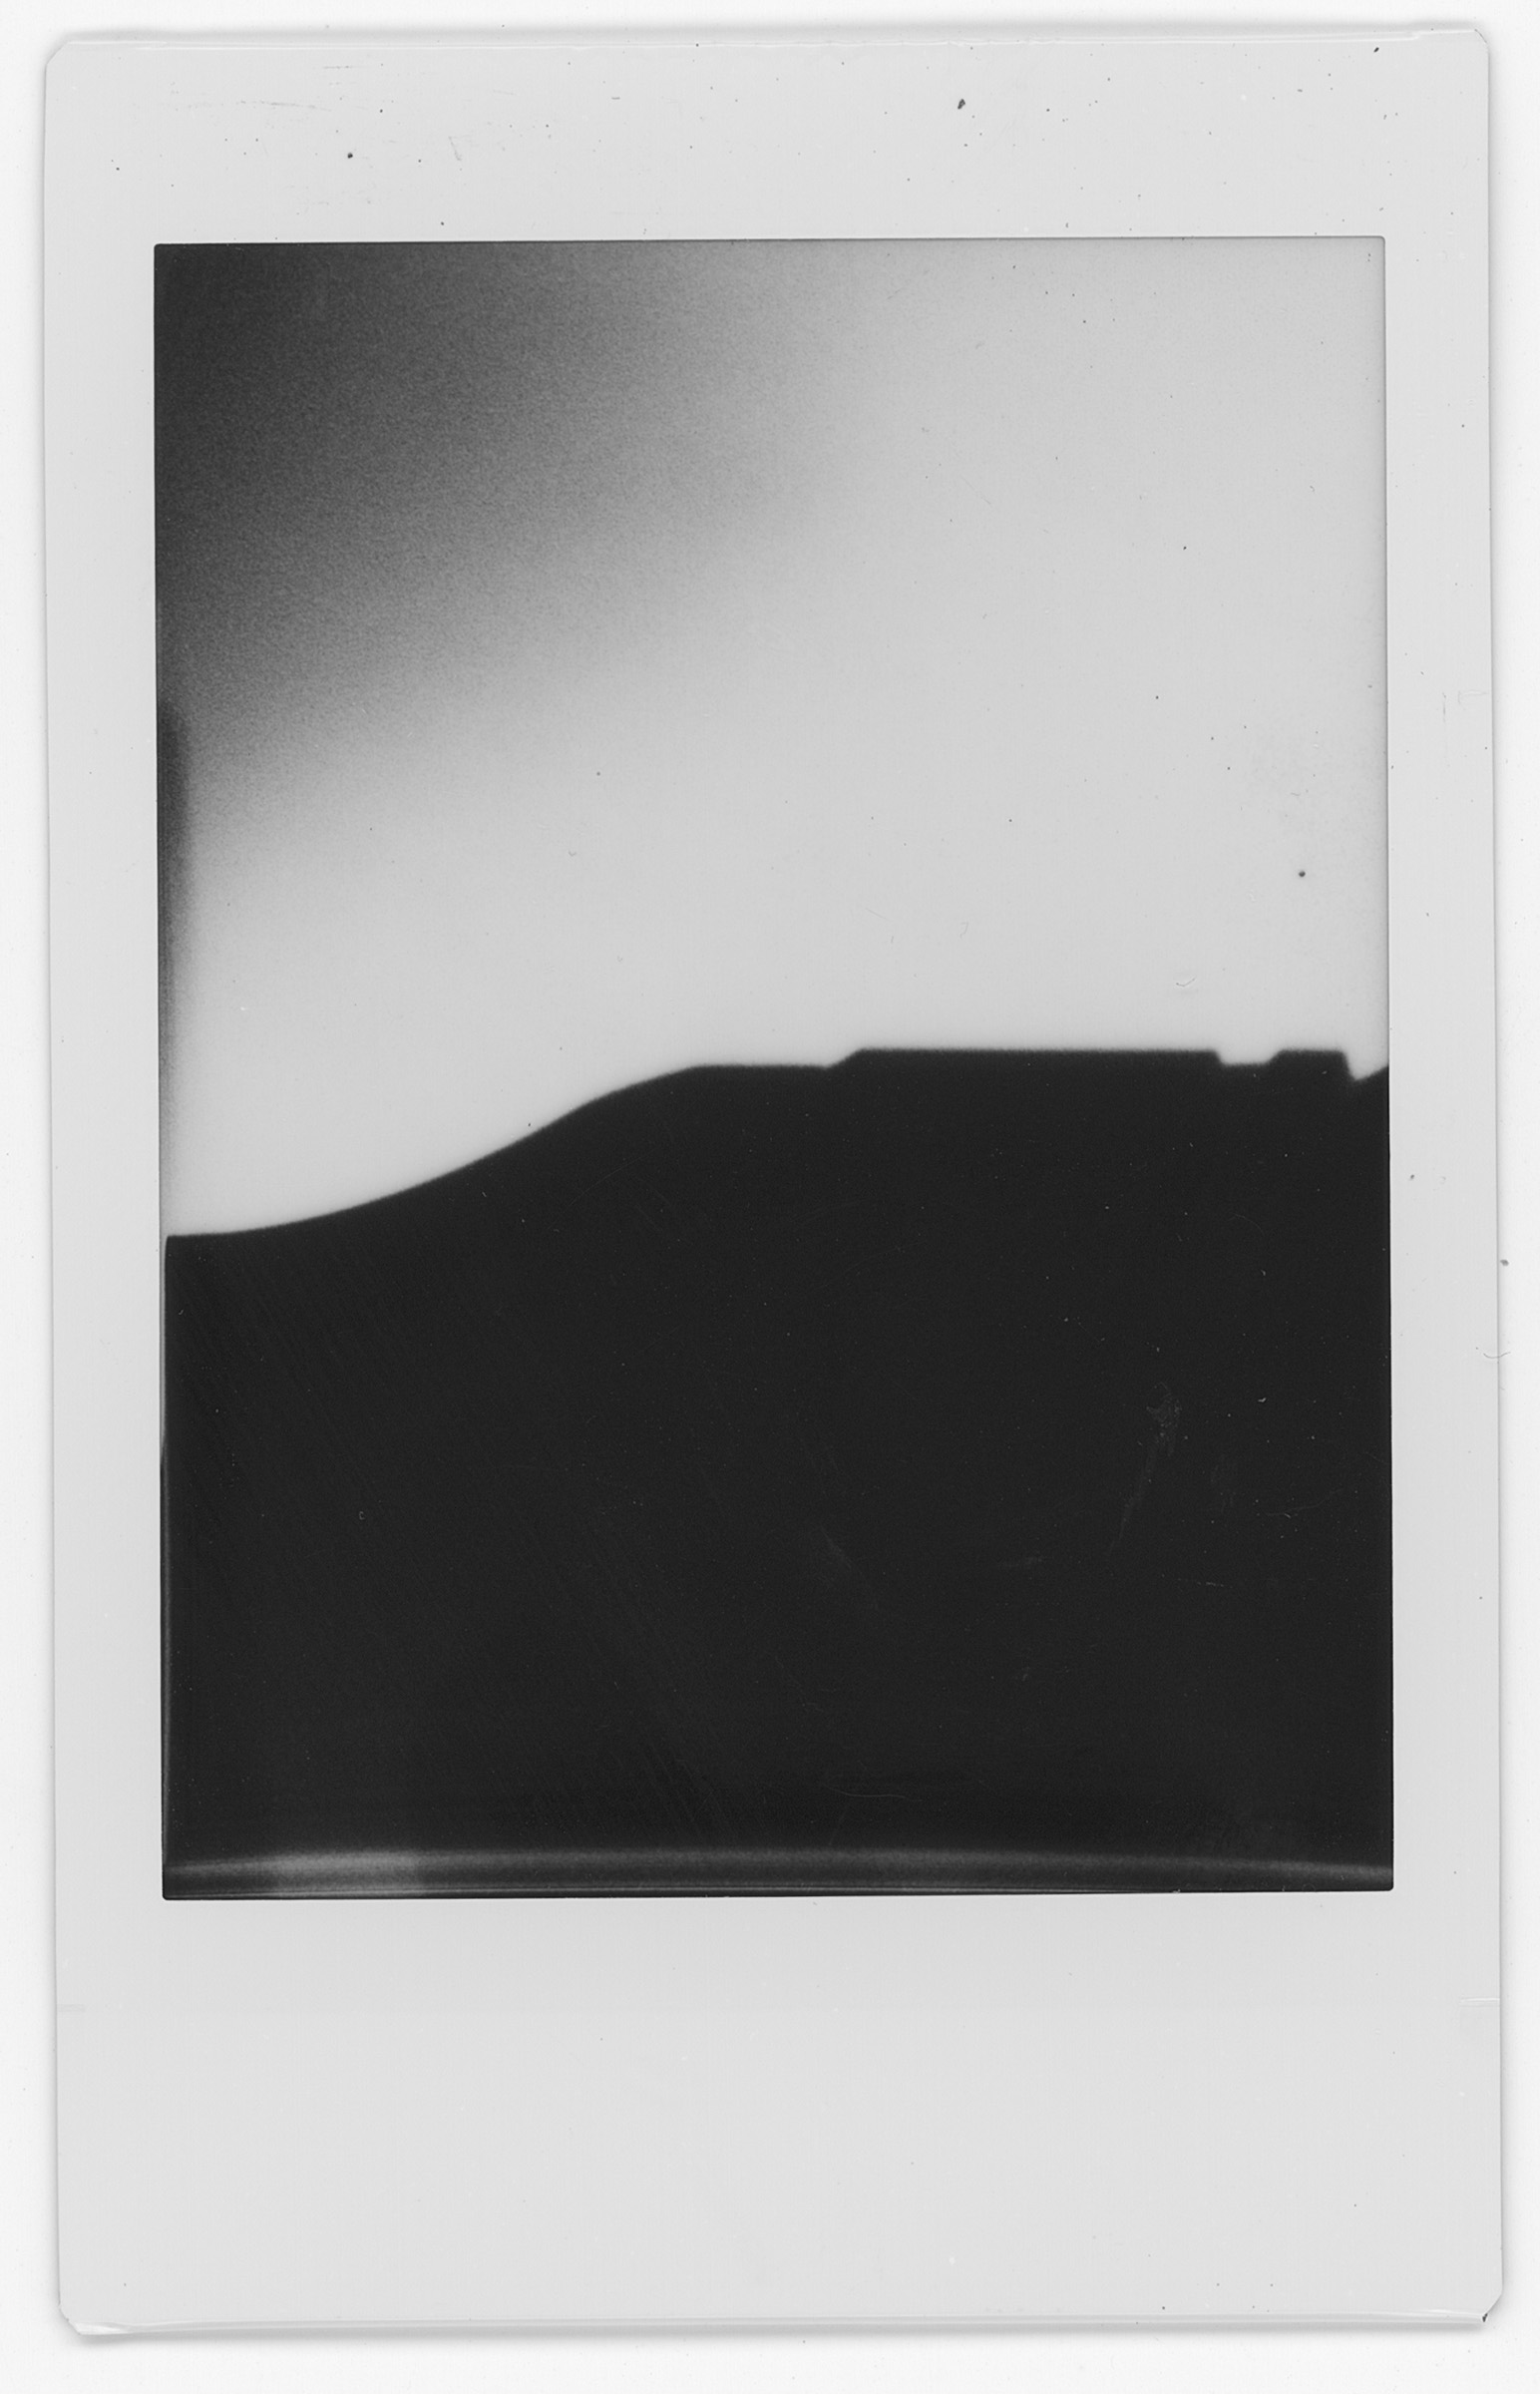 A black and white polaroid of a hill. The hill slopes up from the right of the image where it evens out half way through the image. The top of the photo above the hill is all white. There is a grey shadow in the top left corner.